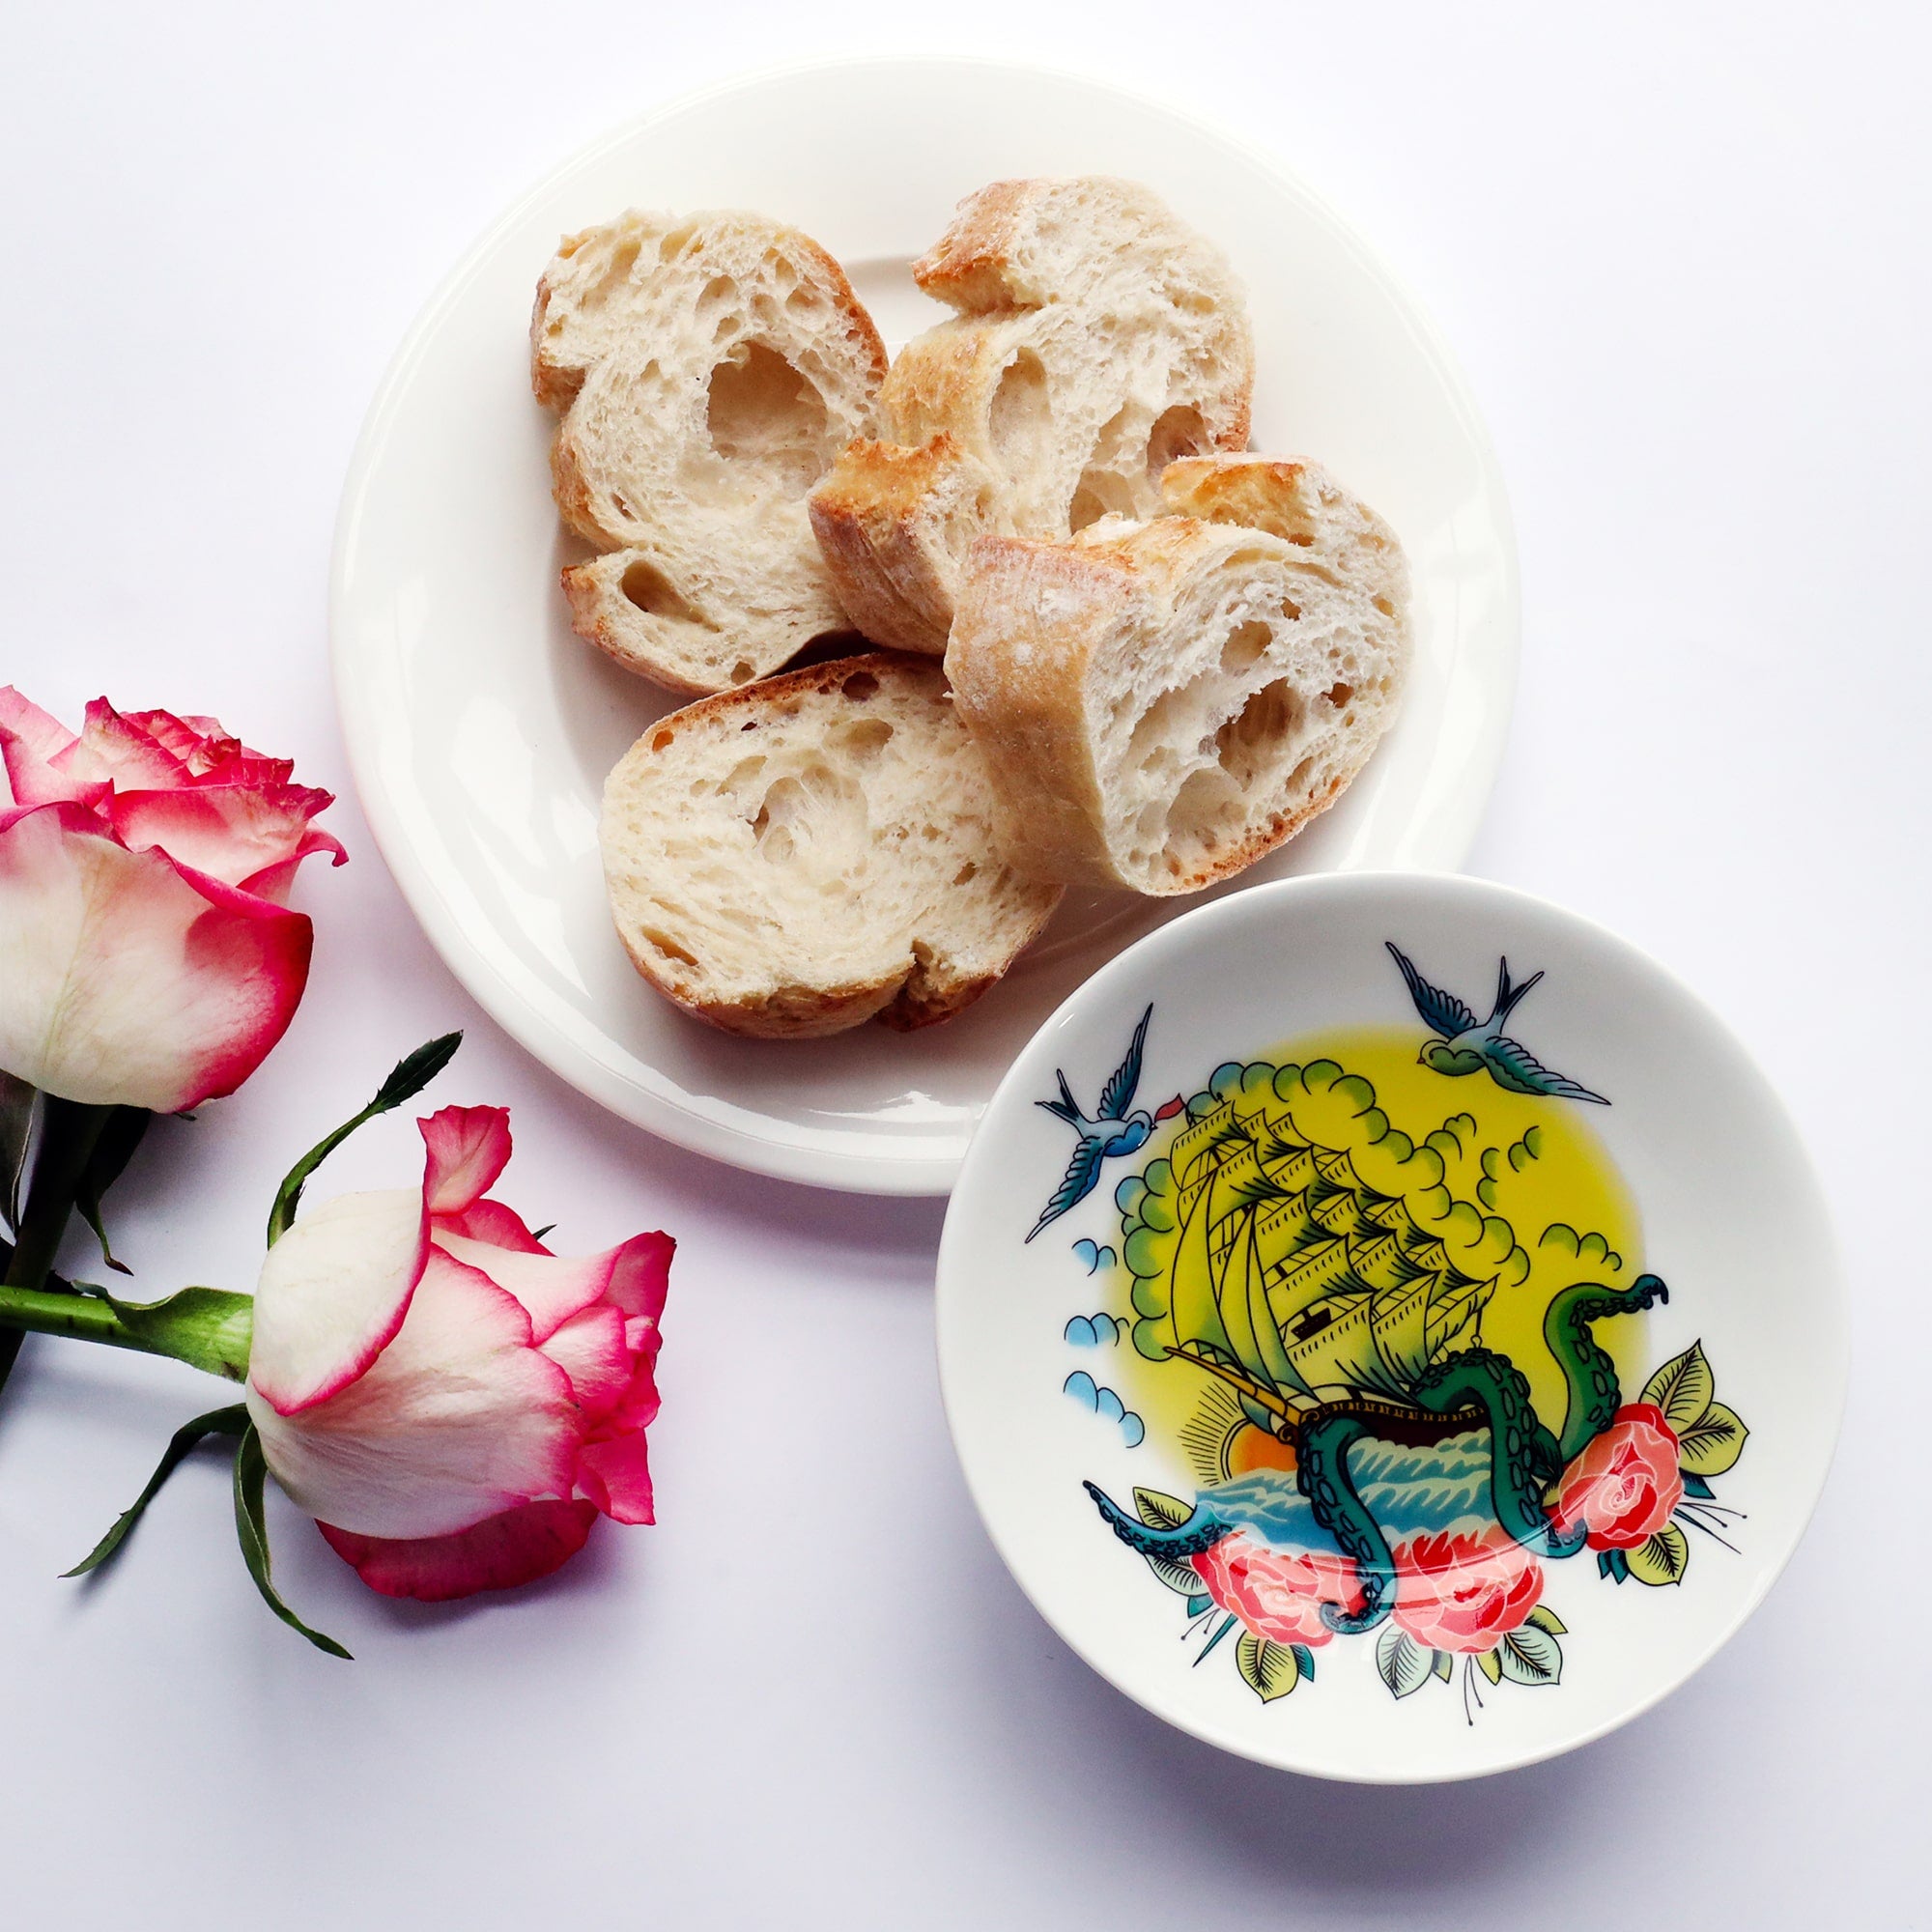 Nibbles dish with ship and kraken design in the style of a tattoo, with olive oil in and a plate of bread next to it. There are 2 pink & white roses to the side.